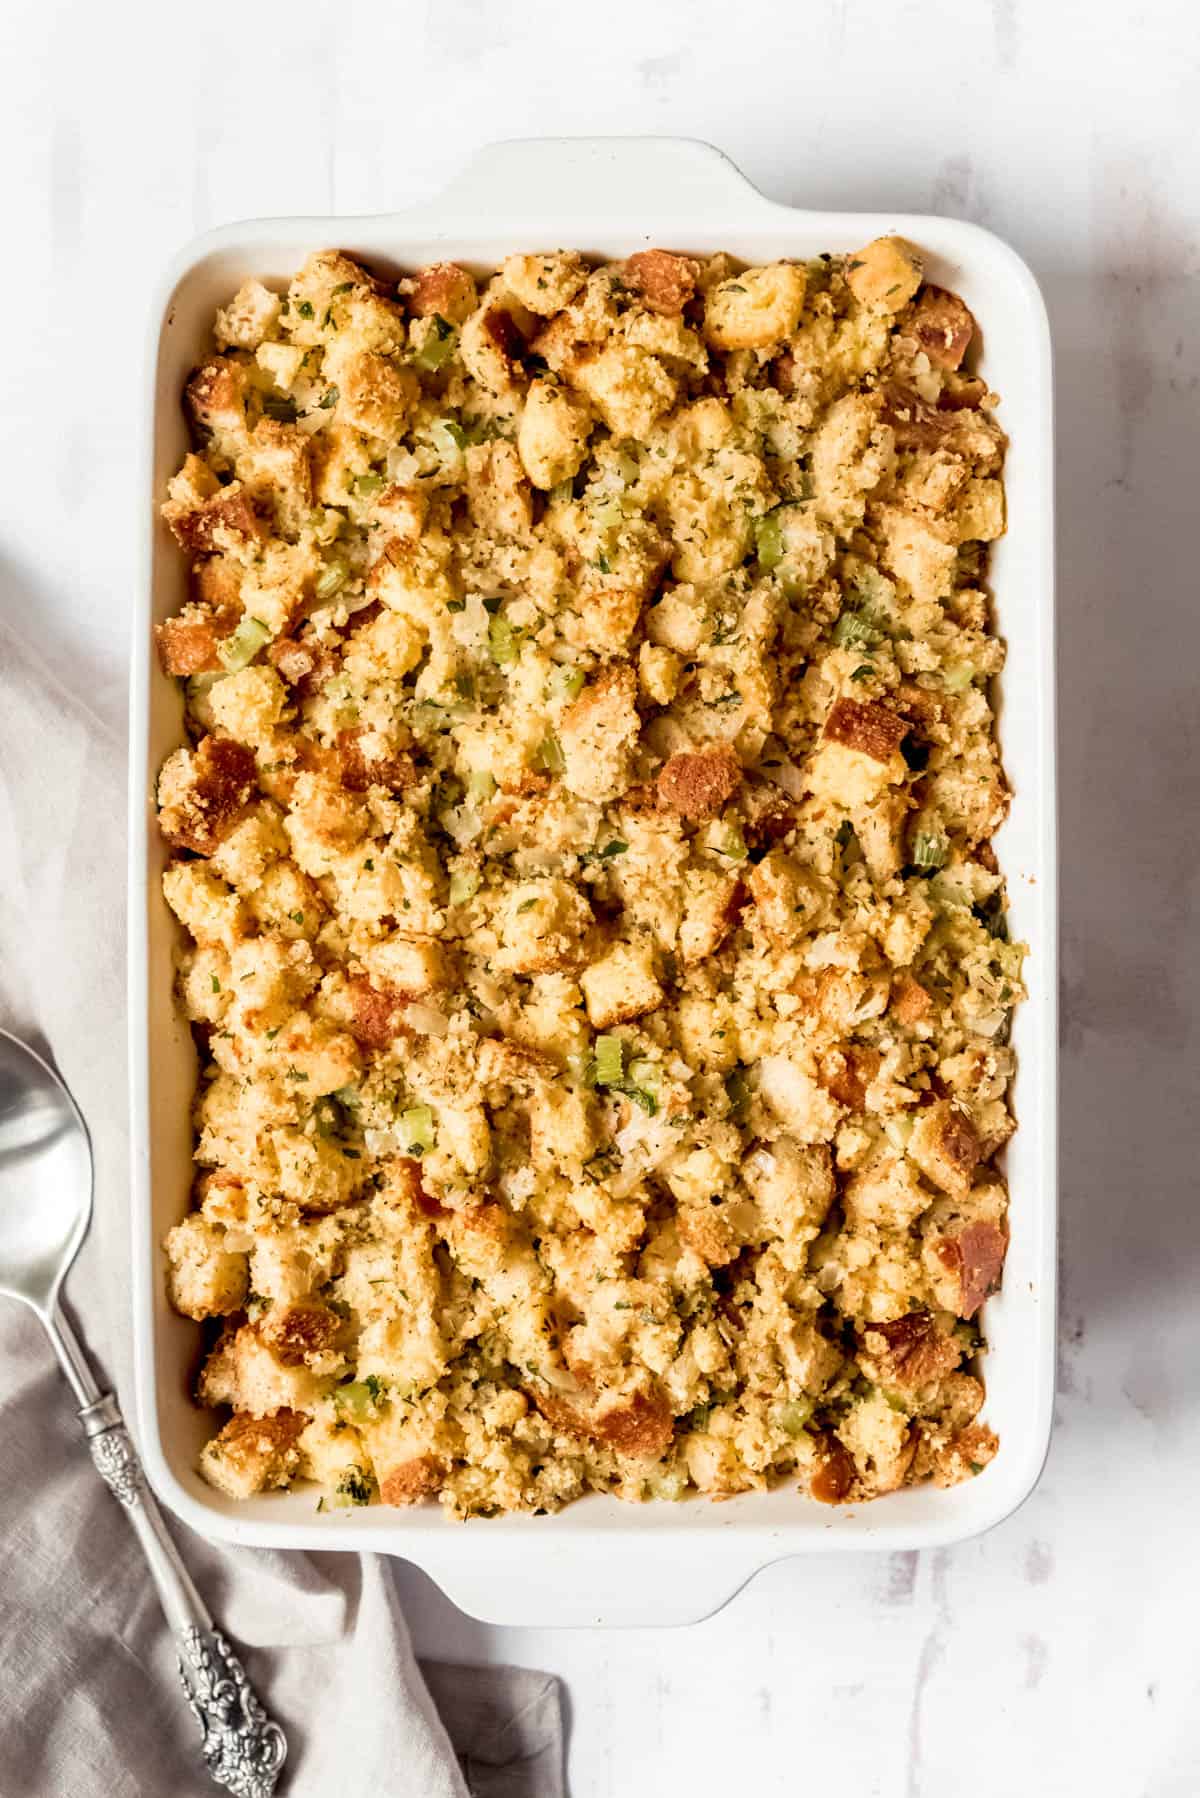 An image of a large baking dish of cornbread stuffing.